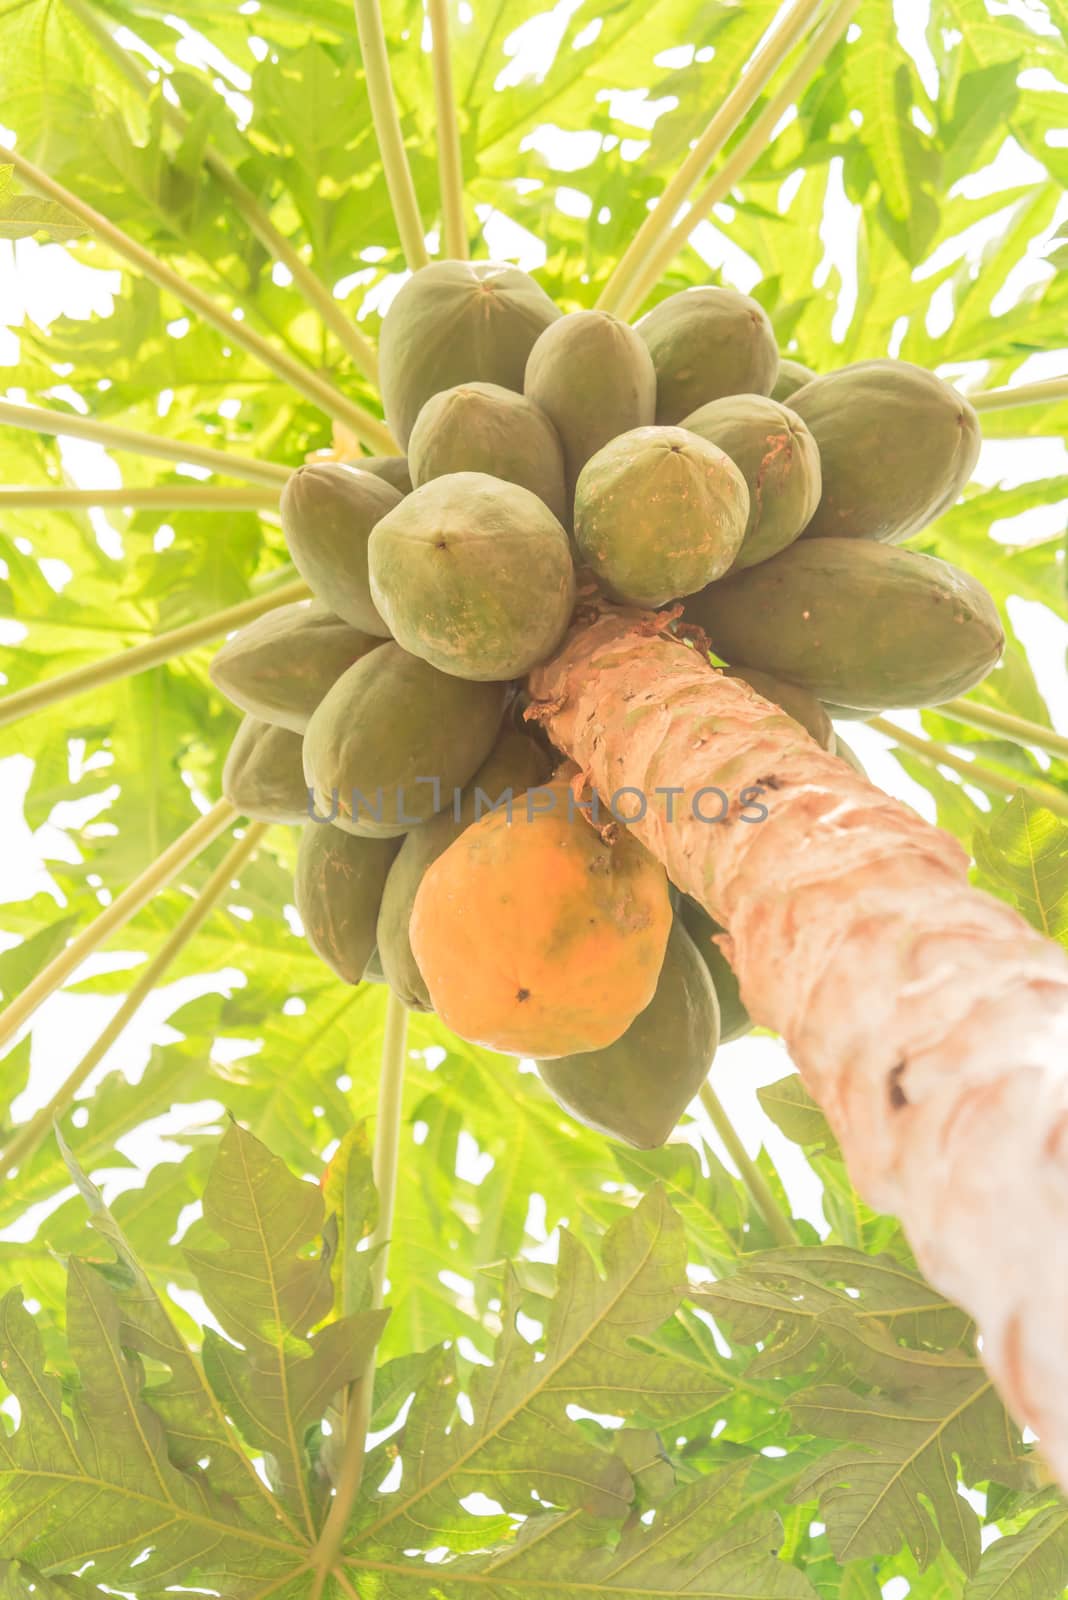 Looking view of one ripe papaya in group of green one, unique concept by trongnguyen